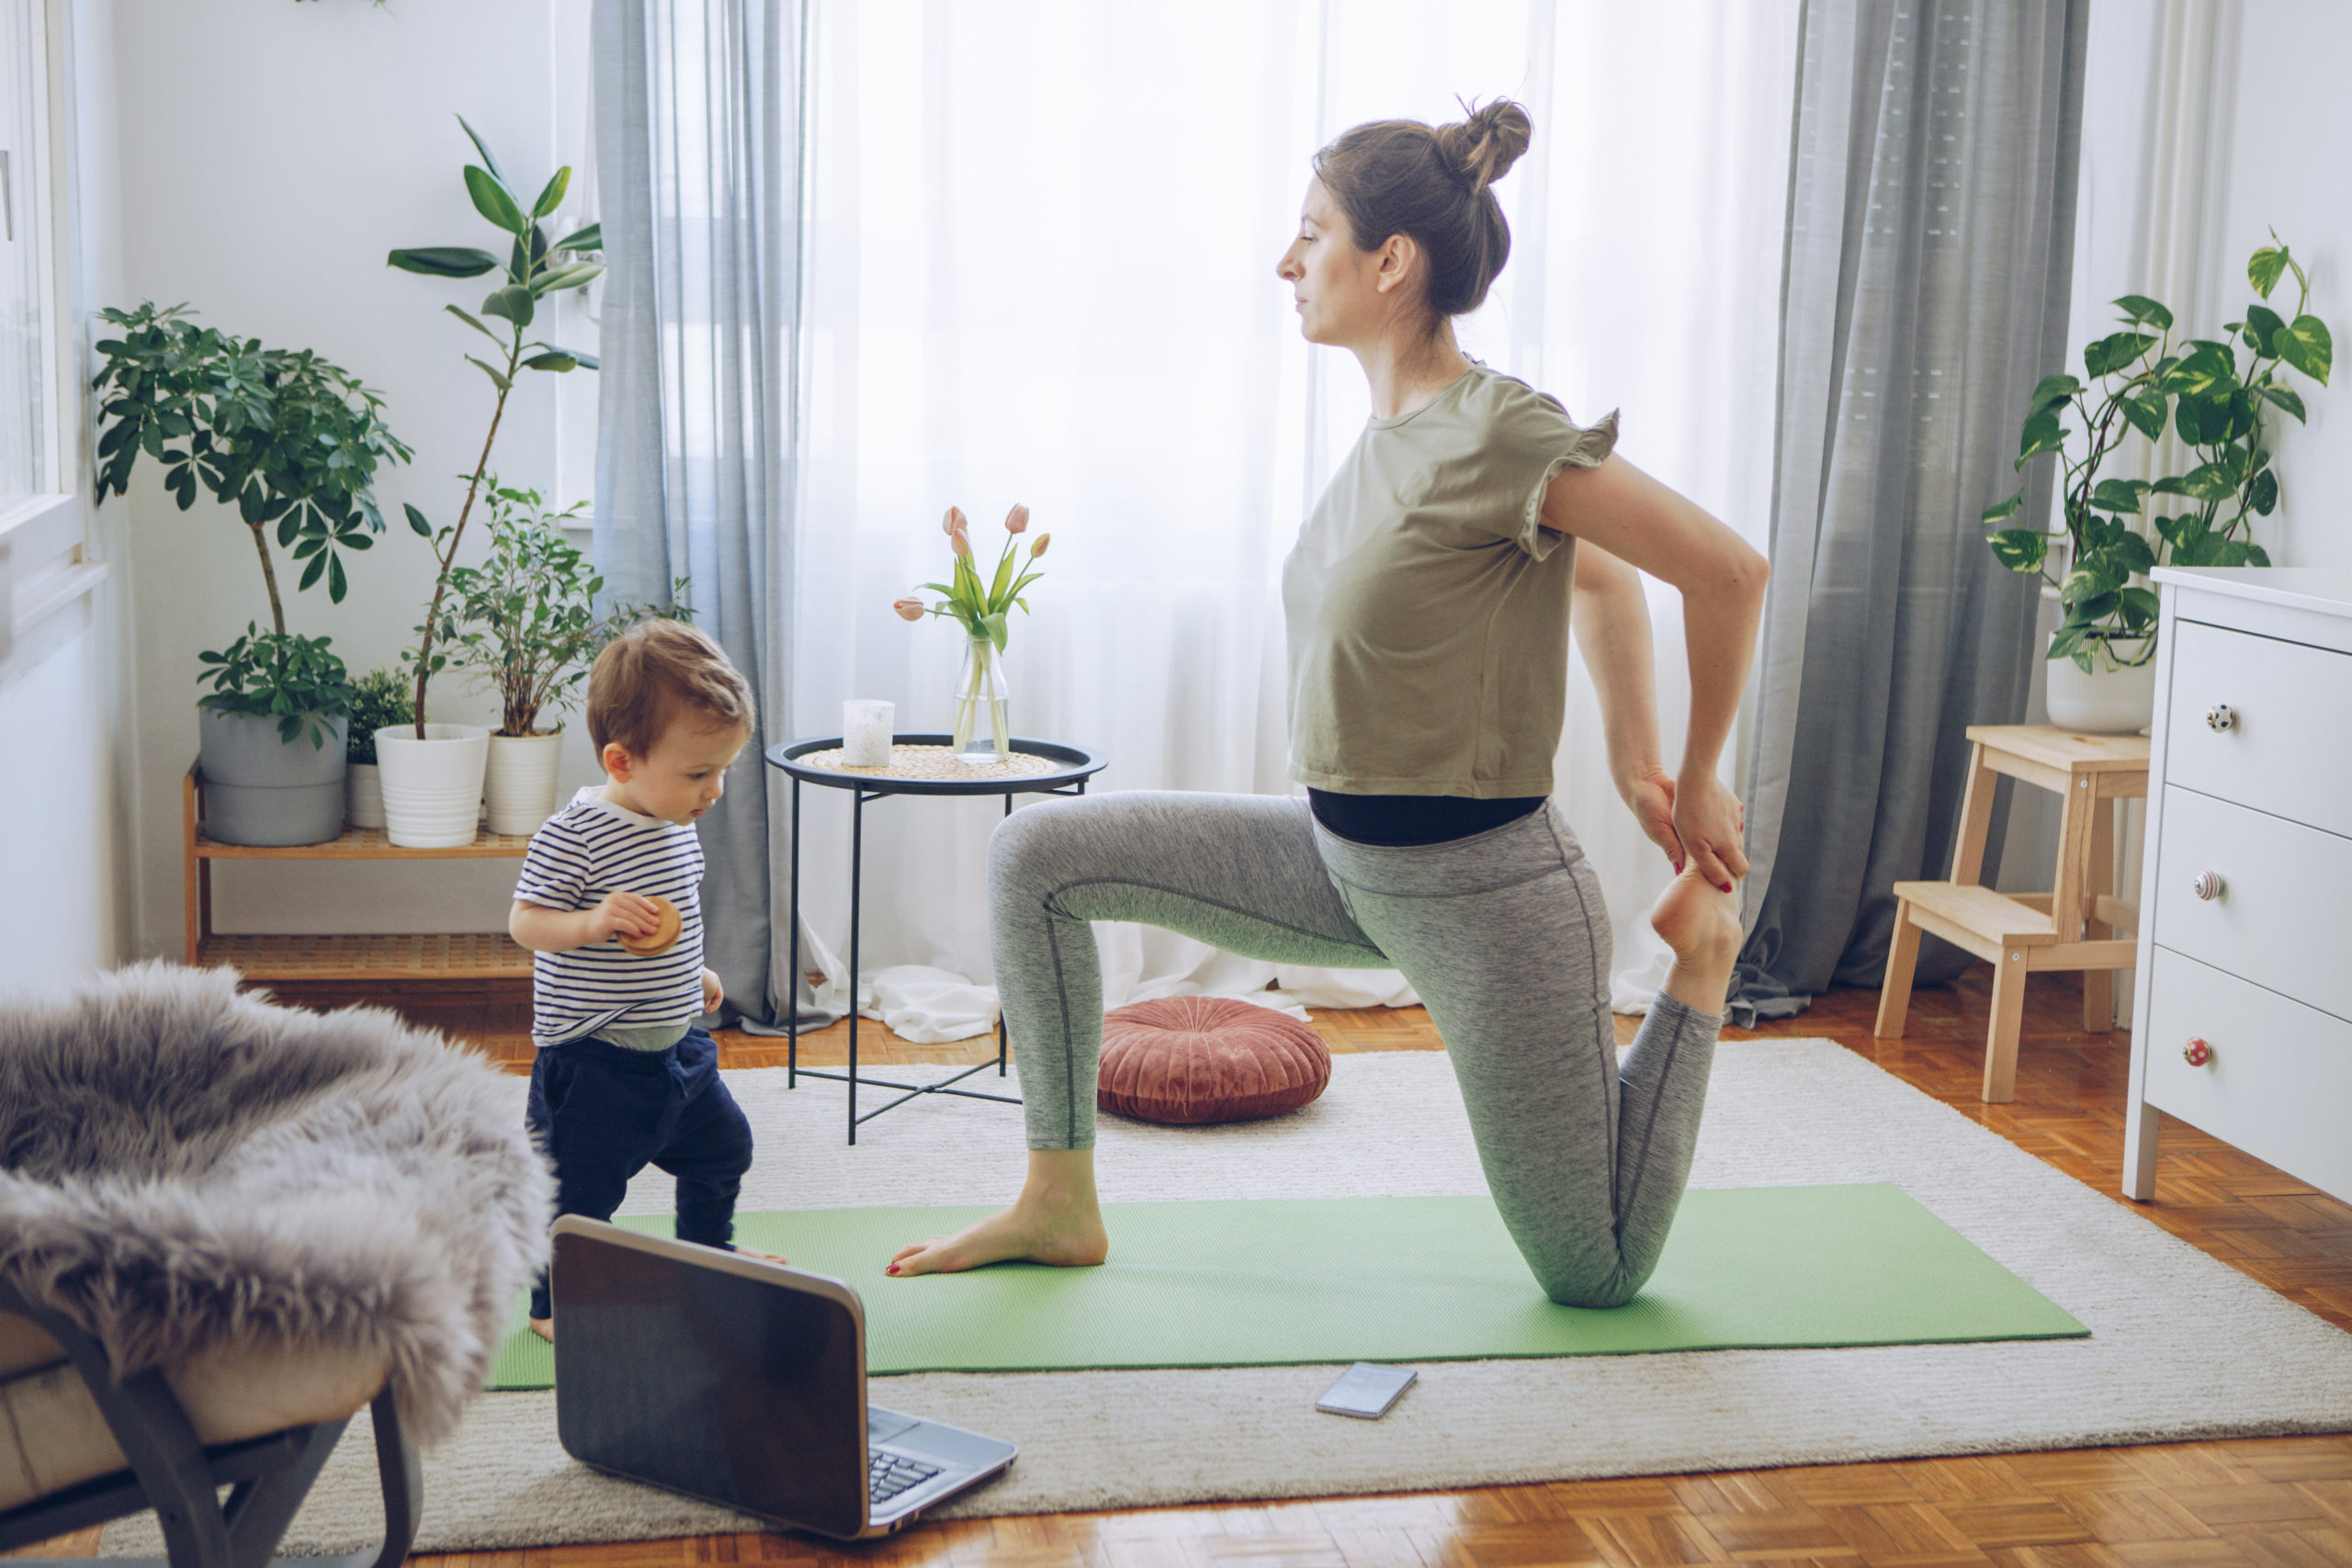 Women exercise yoga while her baby son exploring living room